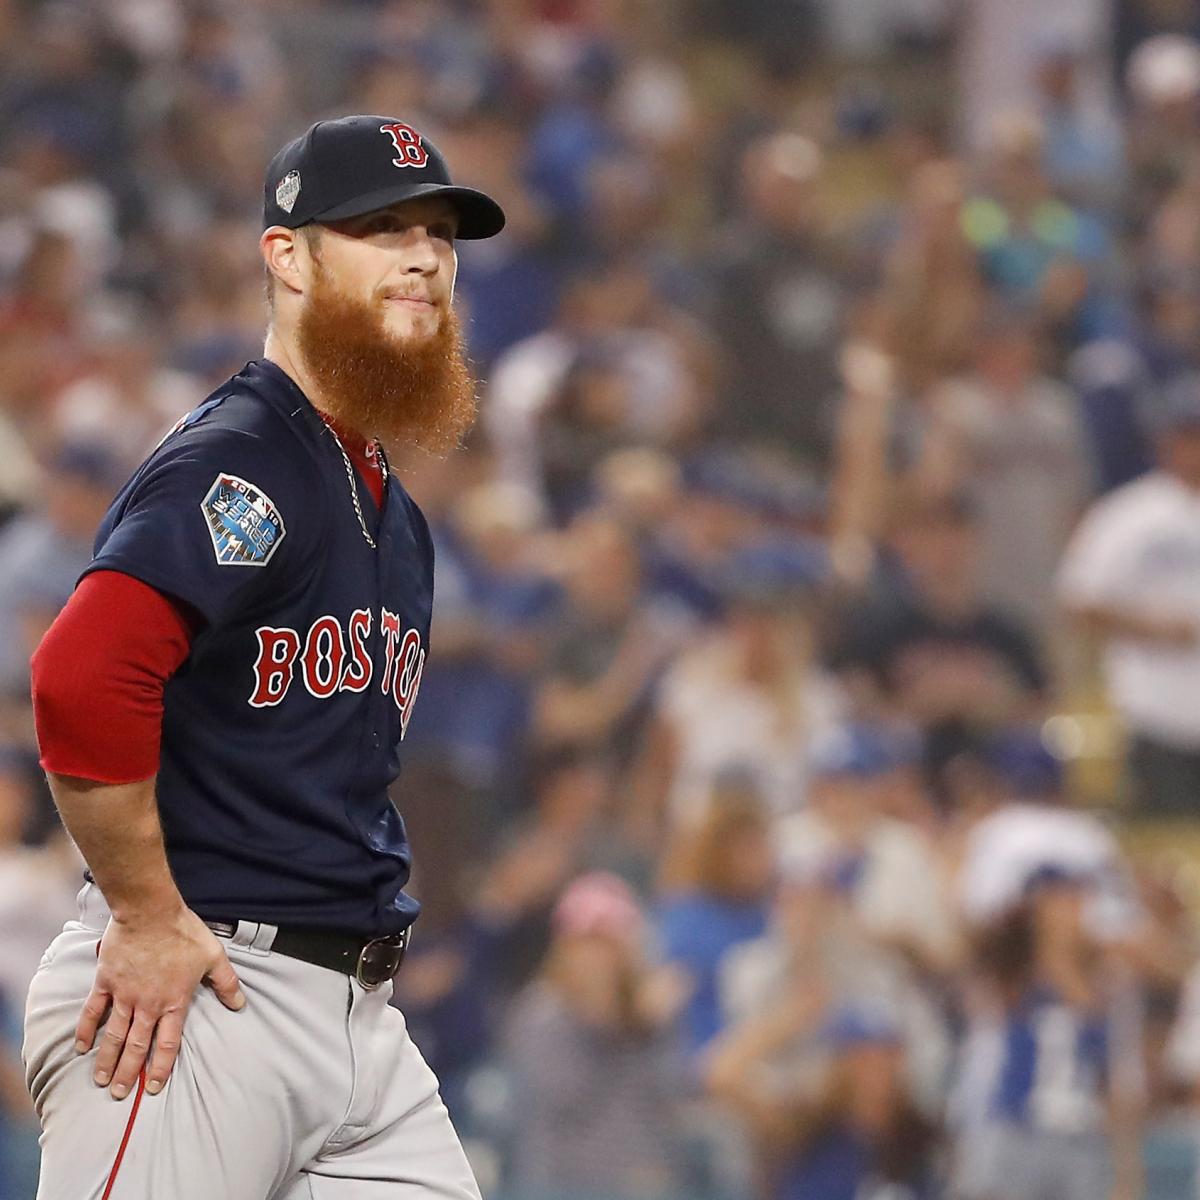 Why Craig Kimbrel Is the All-Star MLB Closer with 42 Saves Who Can